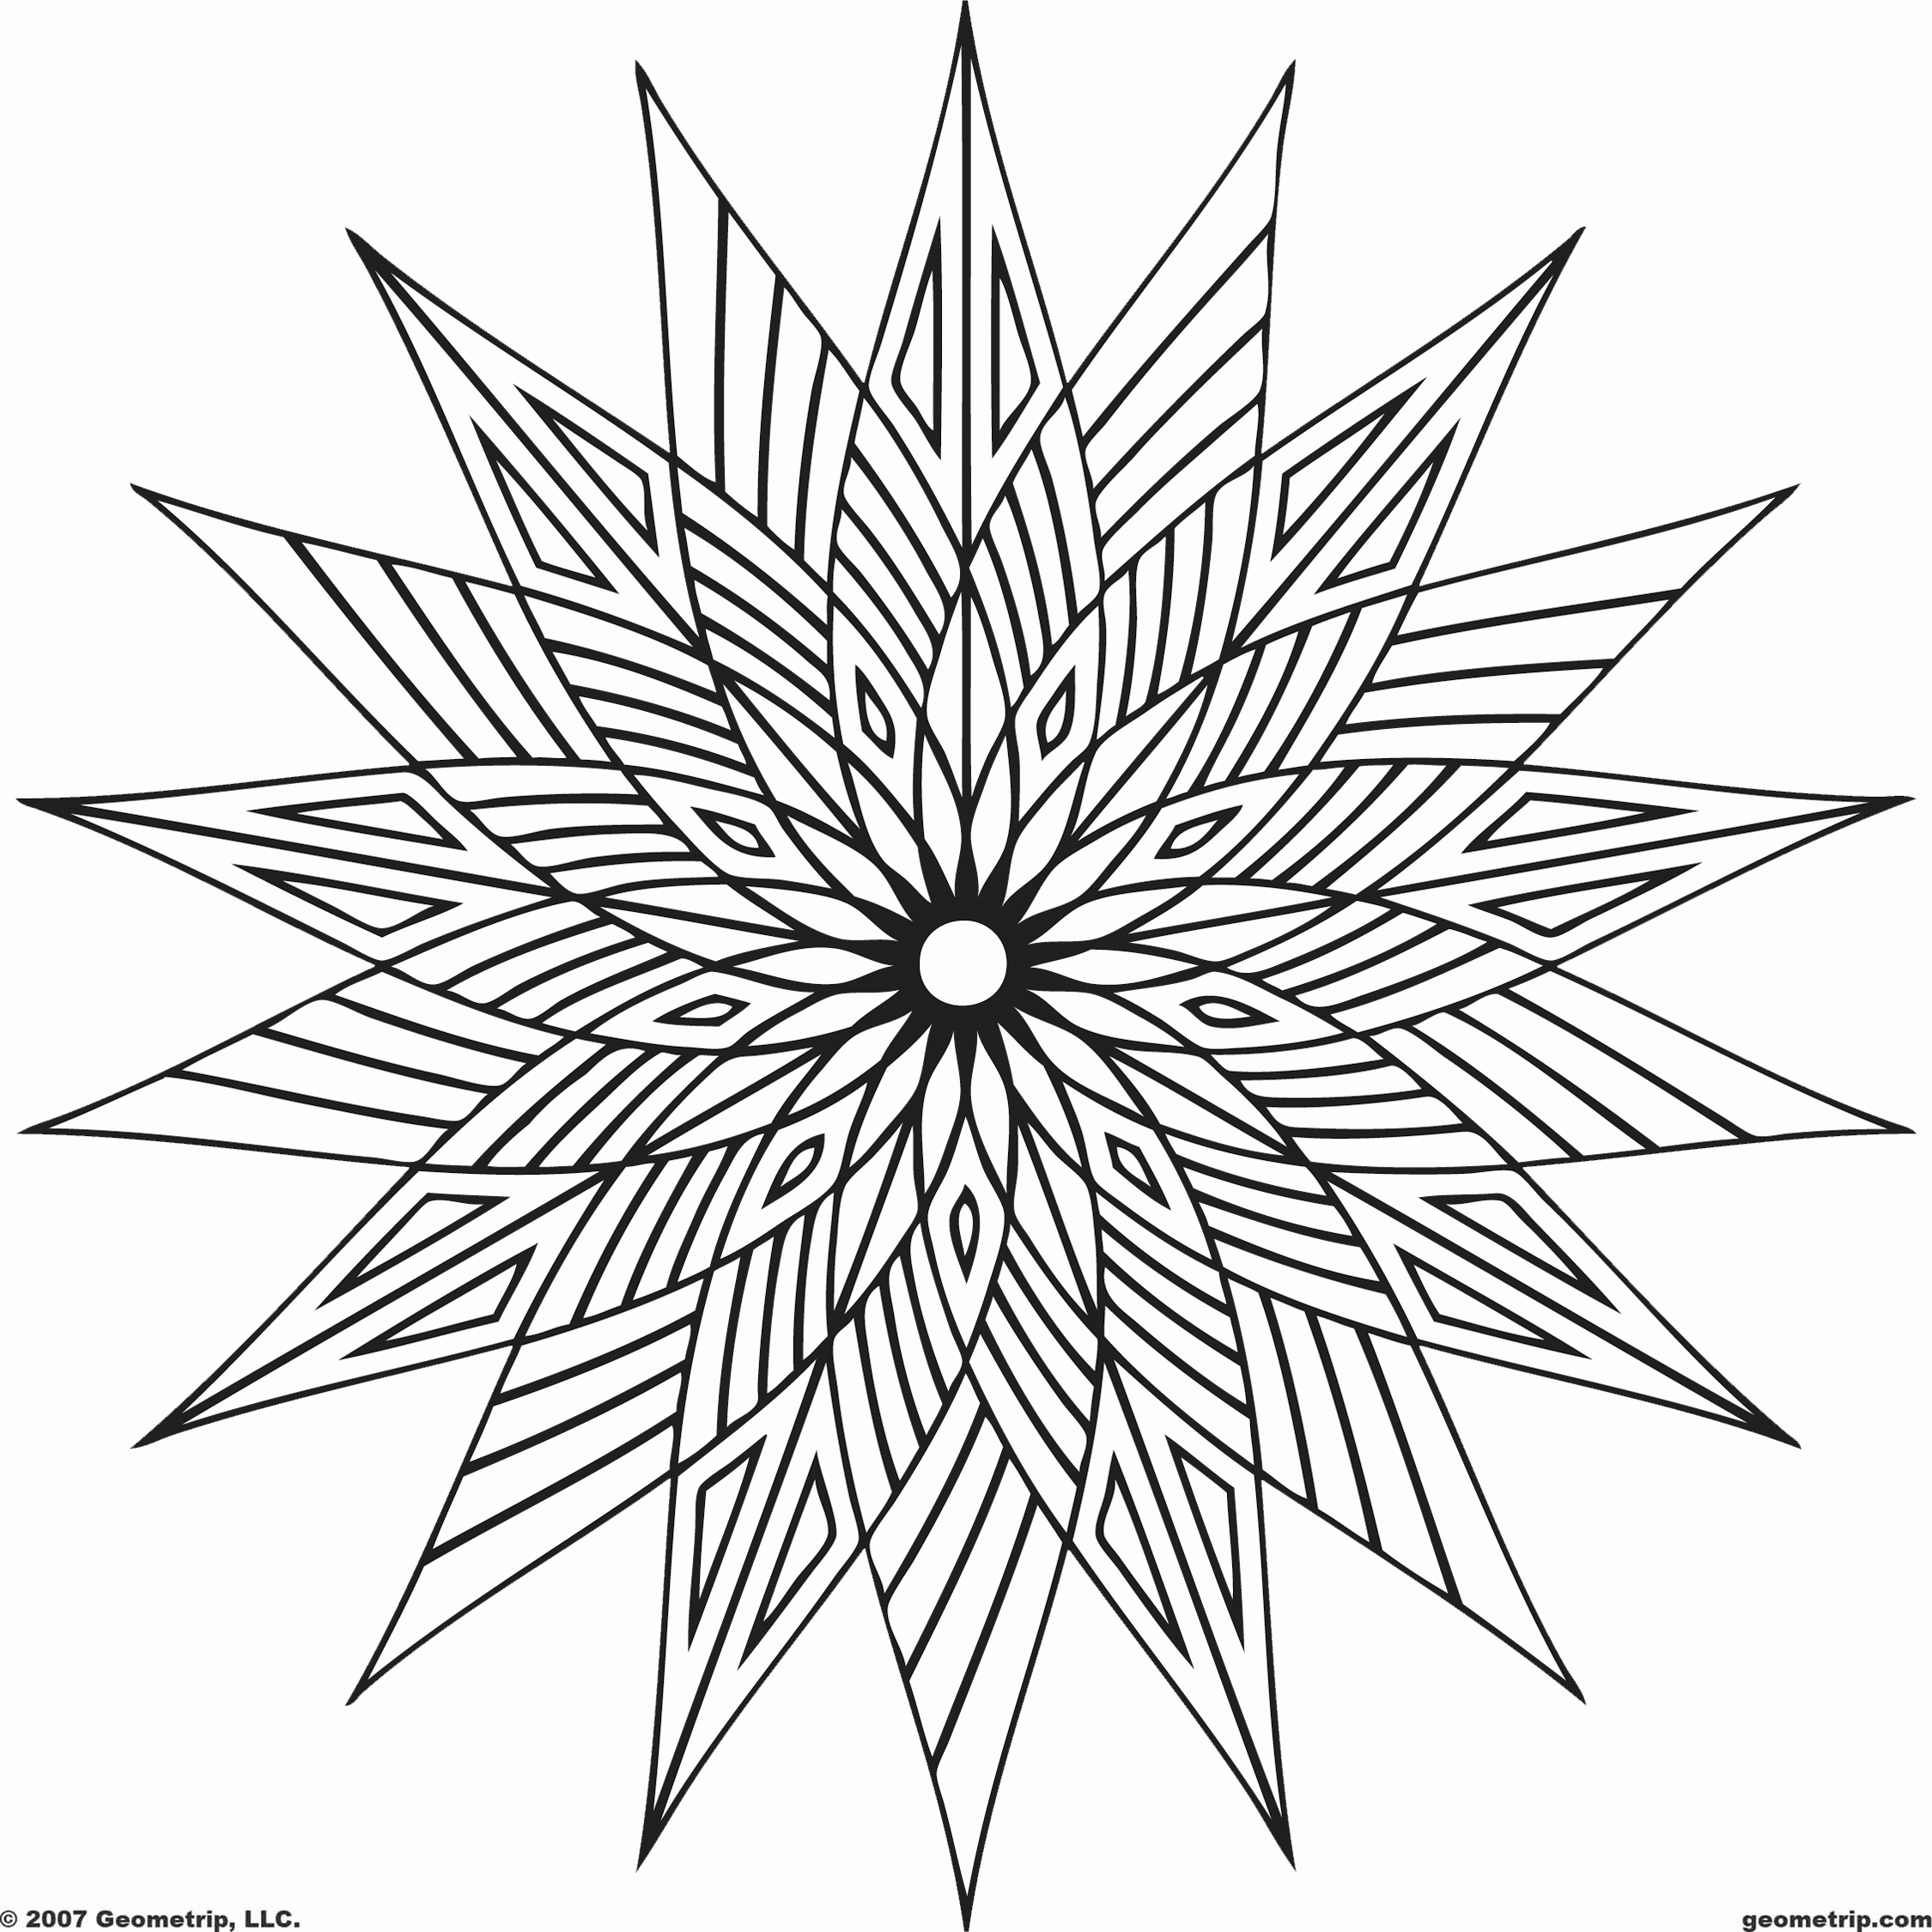 Cool Designs To Color In - Free Printable Advanced Adult Coloring ...